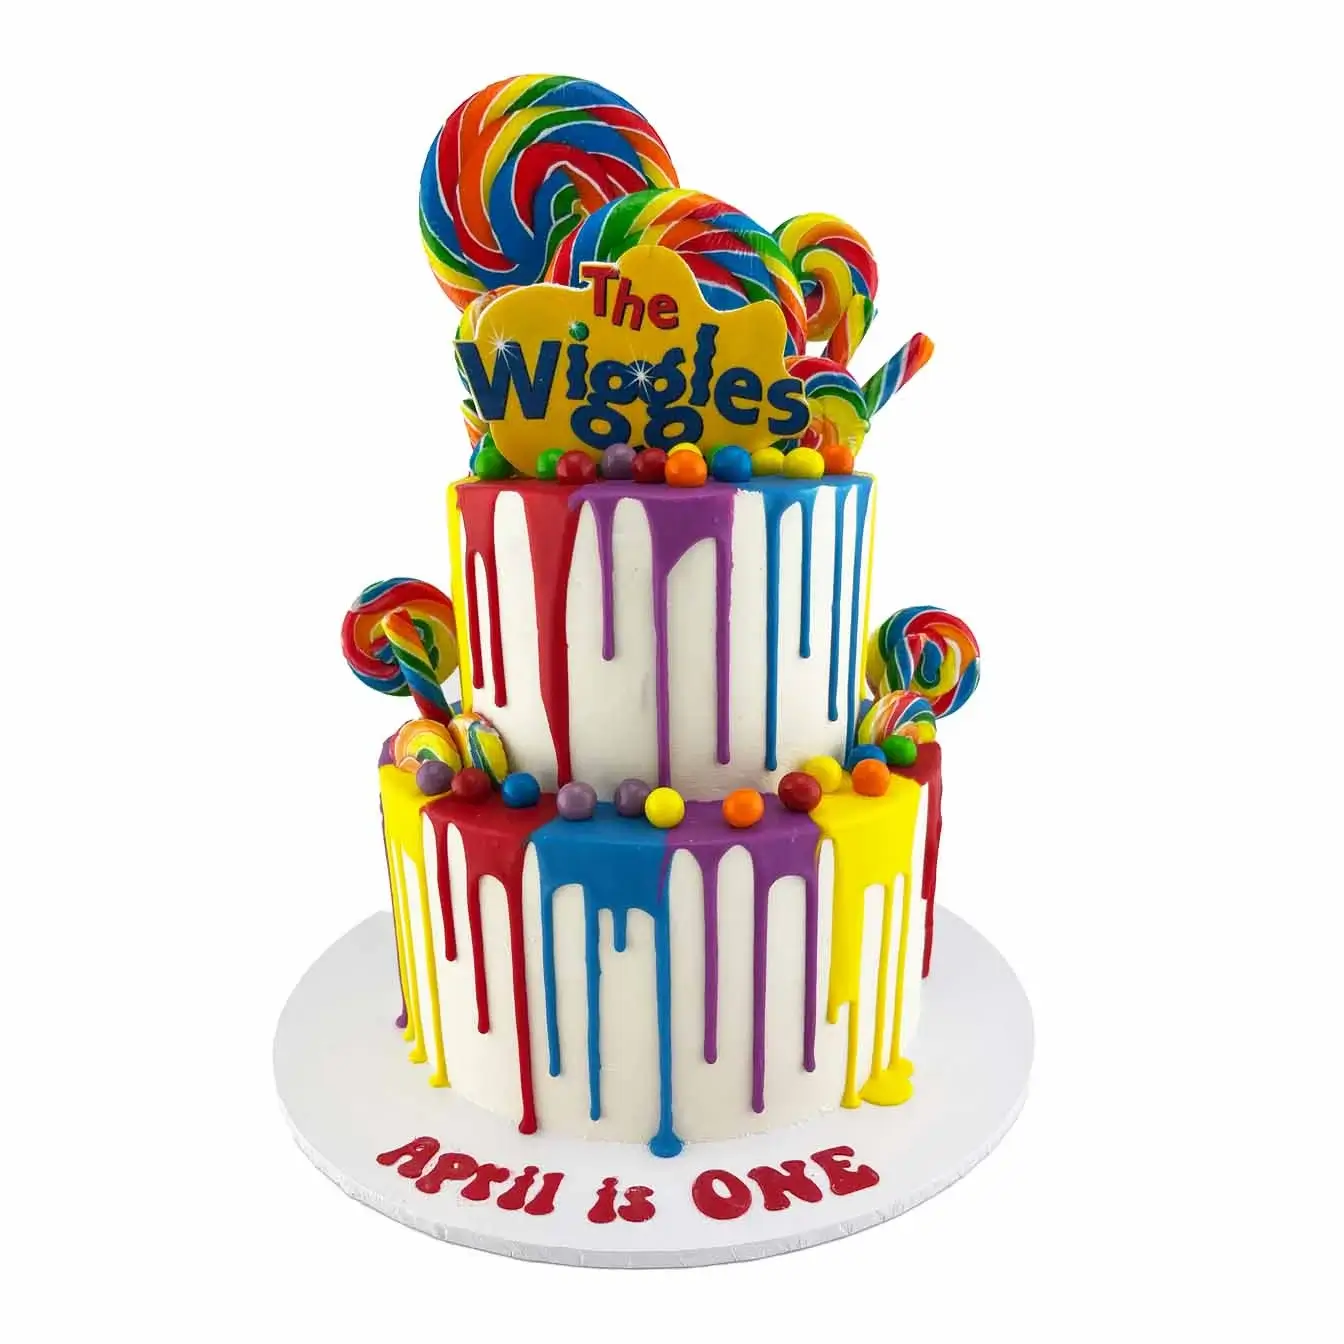 Wiggly Drip Cake Delight - A two-tier white iced cake with red, yellow, blue, and purple drips, rainbow lollipops, Skittles, and the iconic Wiggles logo, bringing the wiggly magic to your celebration.